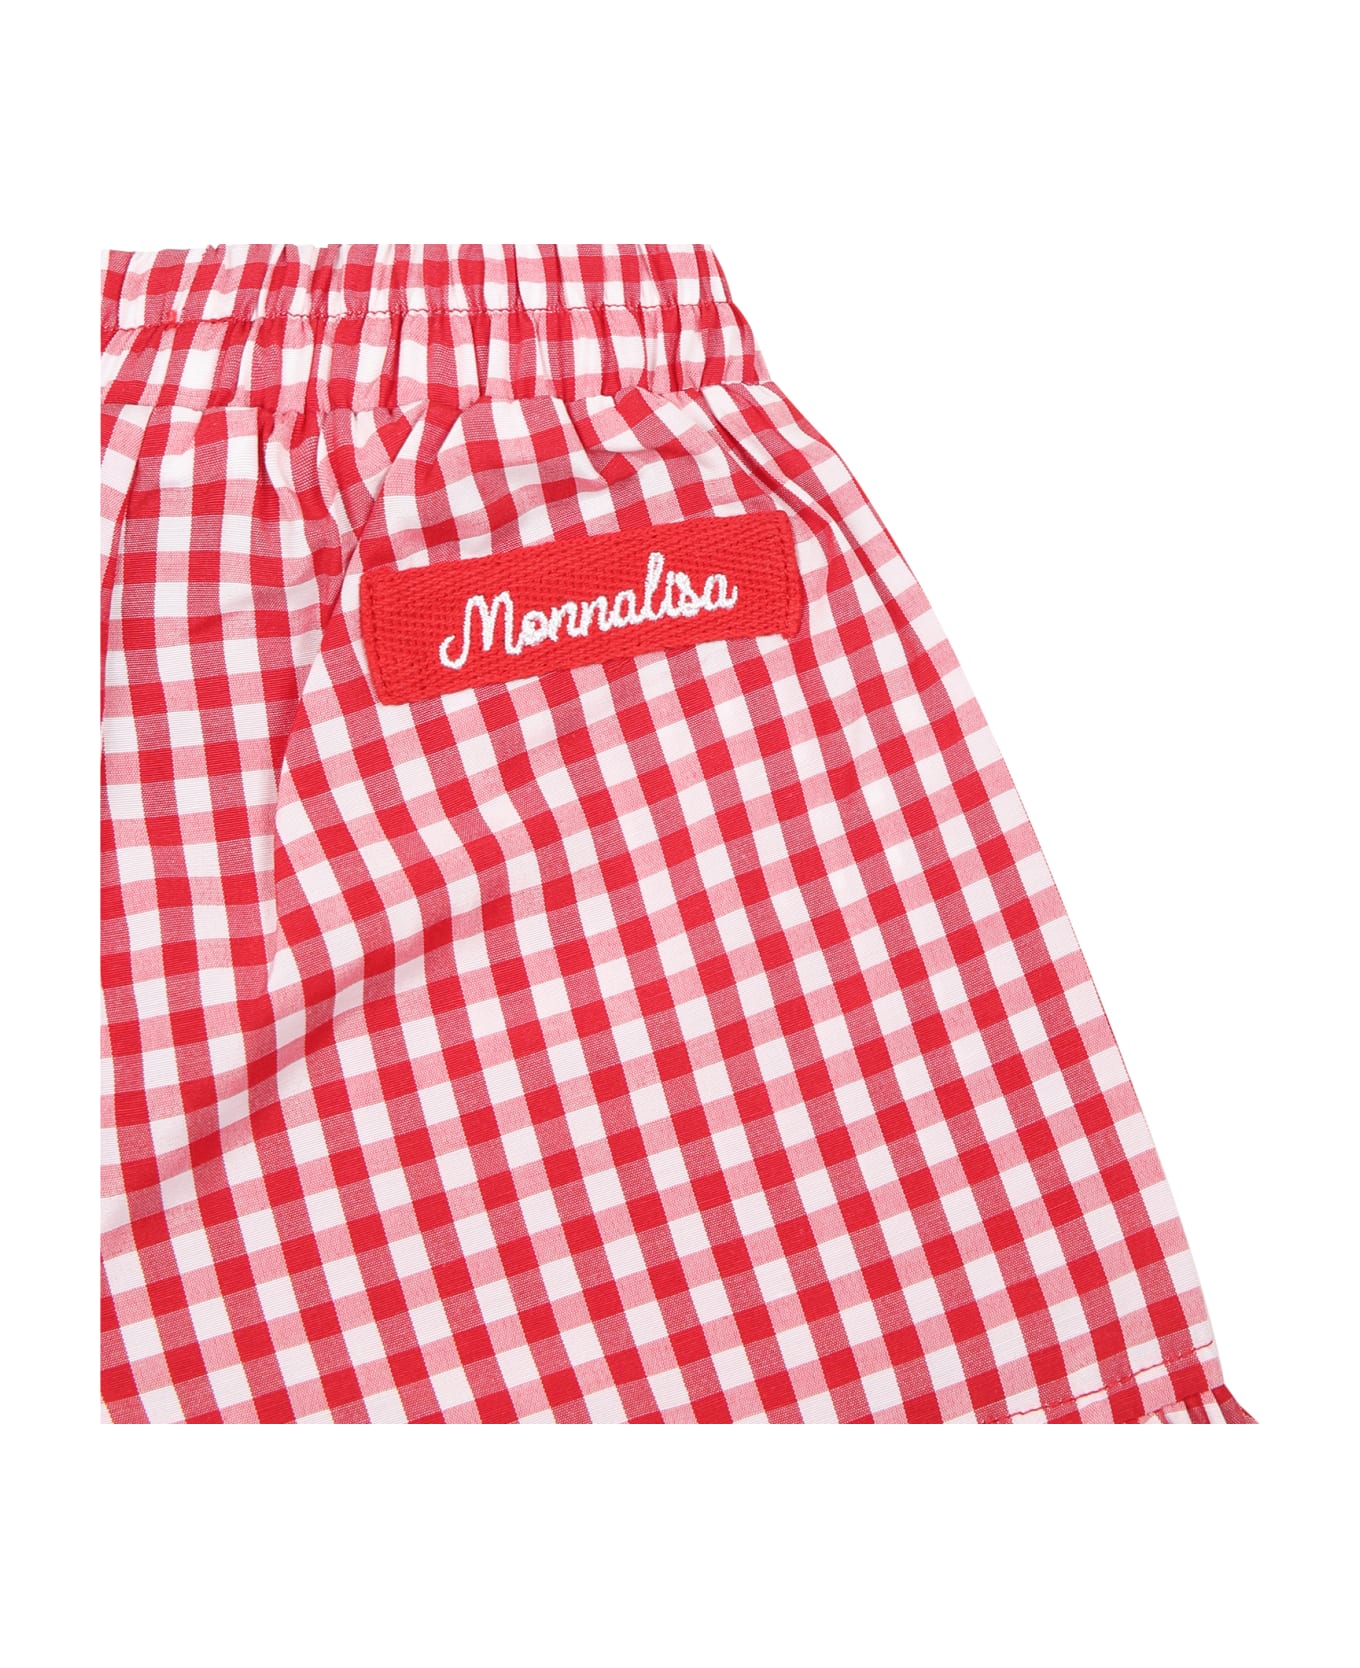 Monnalisa Red Shorts For Baby Girl With Logo - Red ボトムス